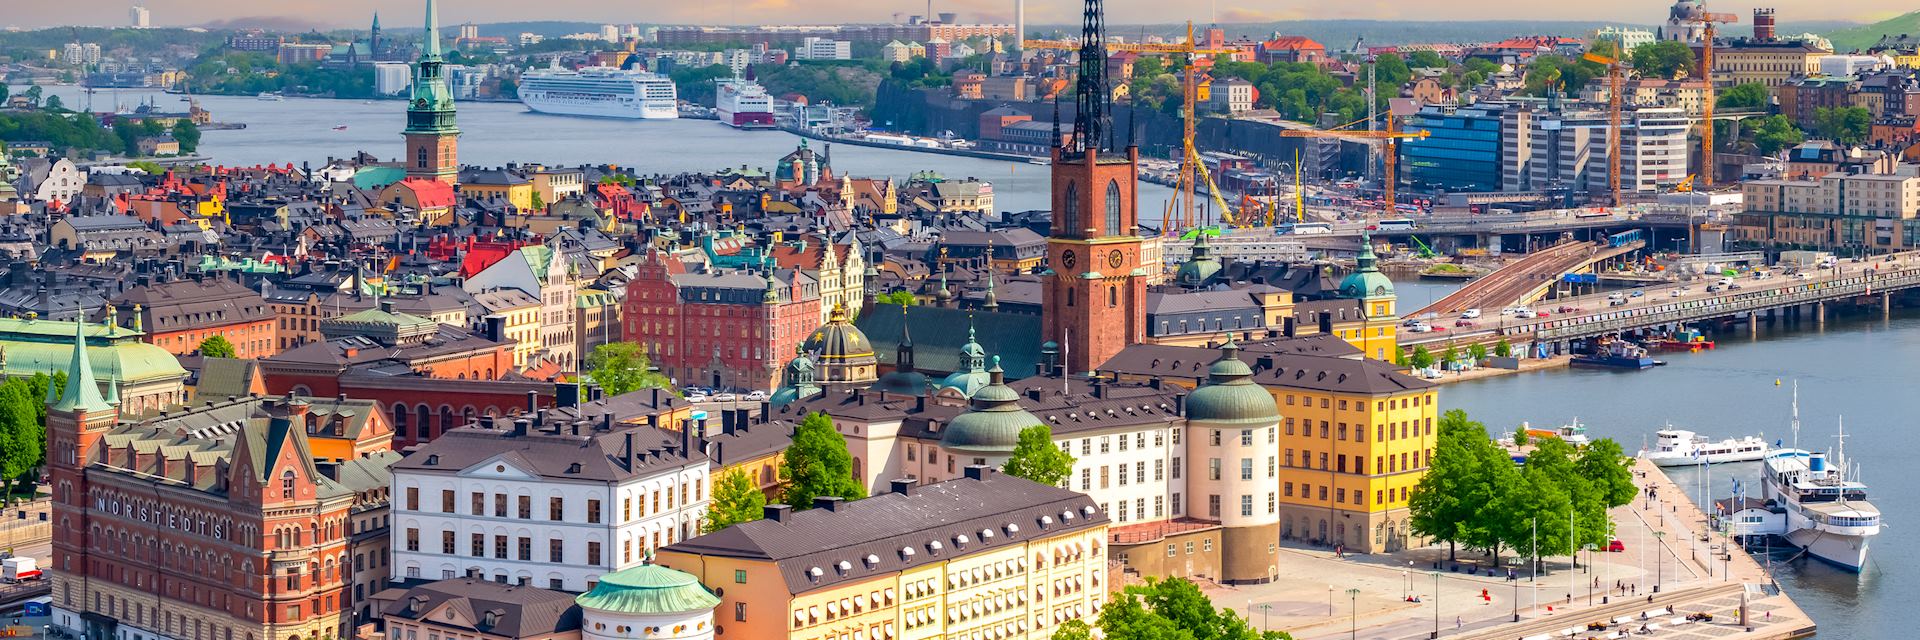 Aerial view of Stockholm's old town